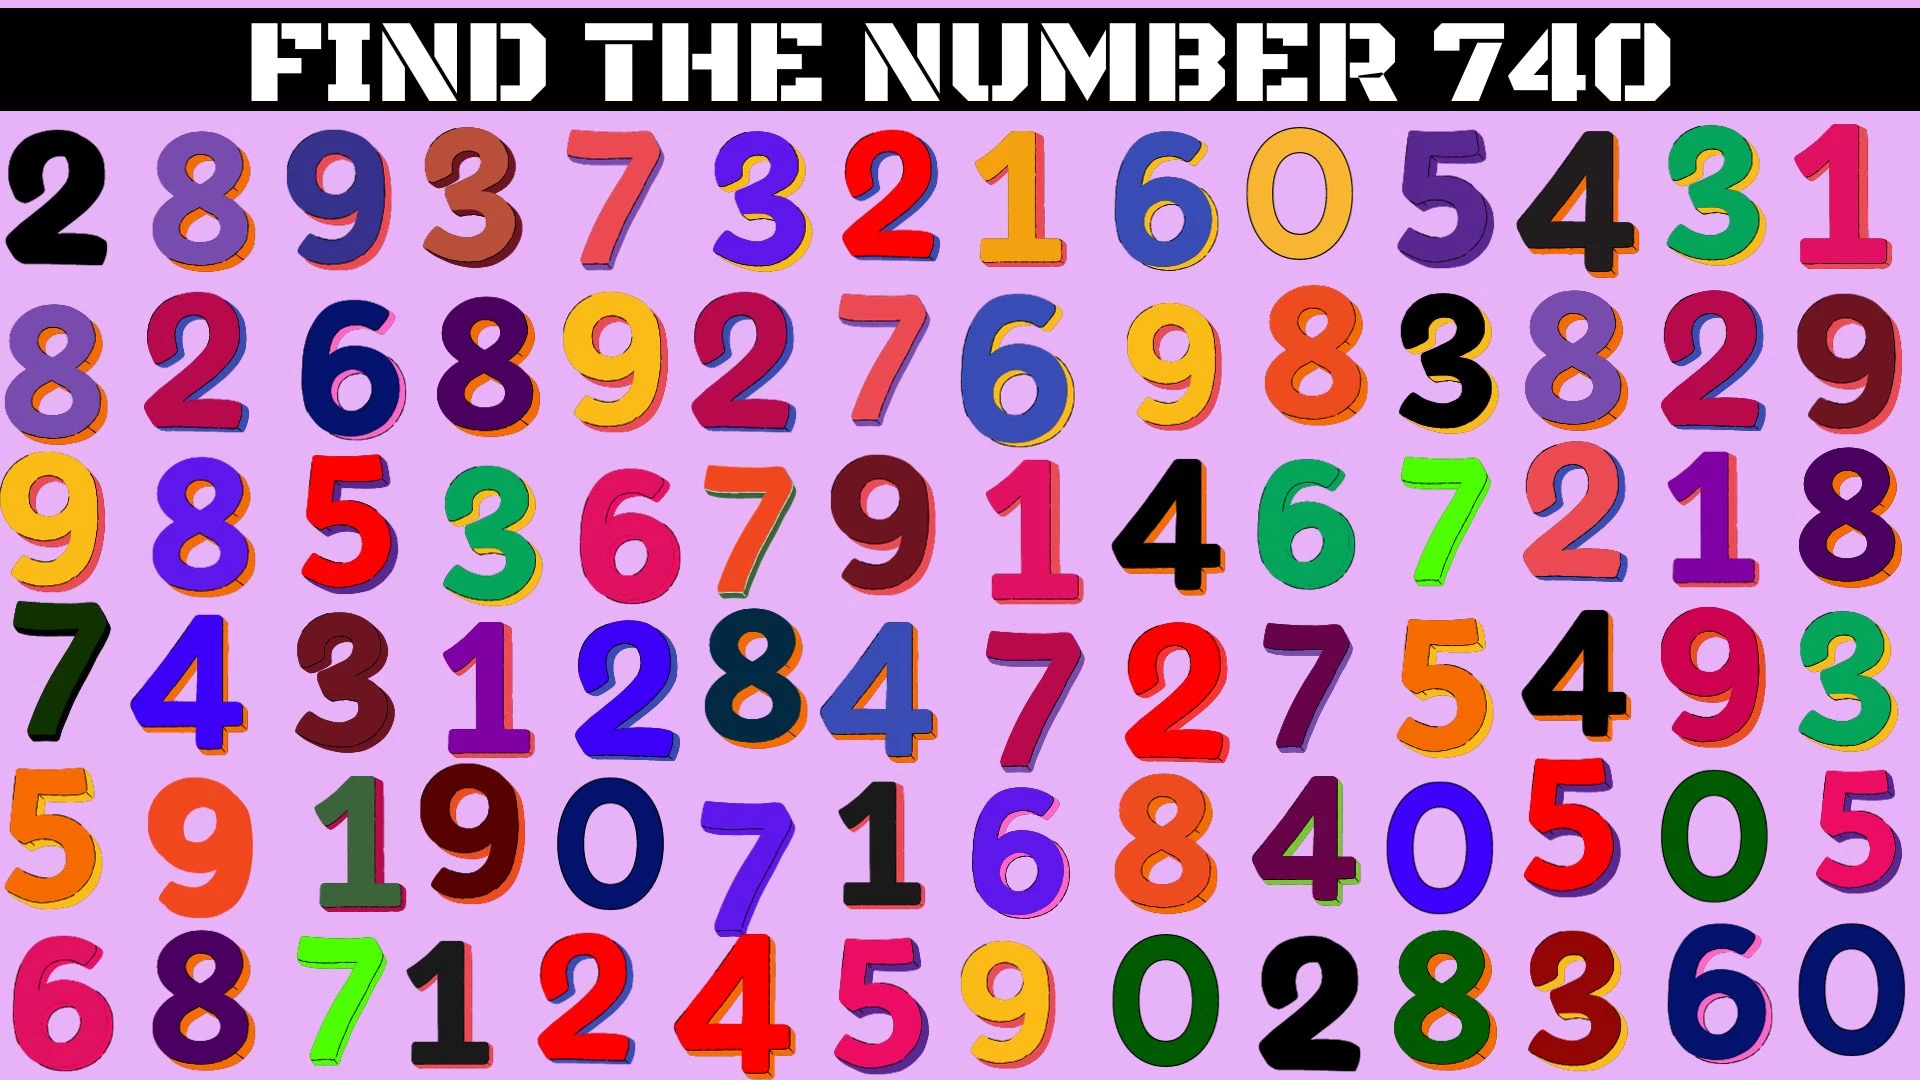 Optical Illusion Brain Challenge: If You Have Eagle Eyes Find the Number 740 in 12 Seconds